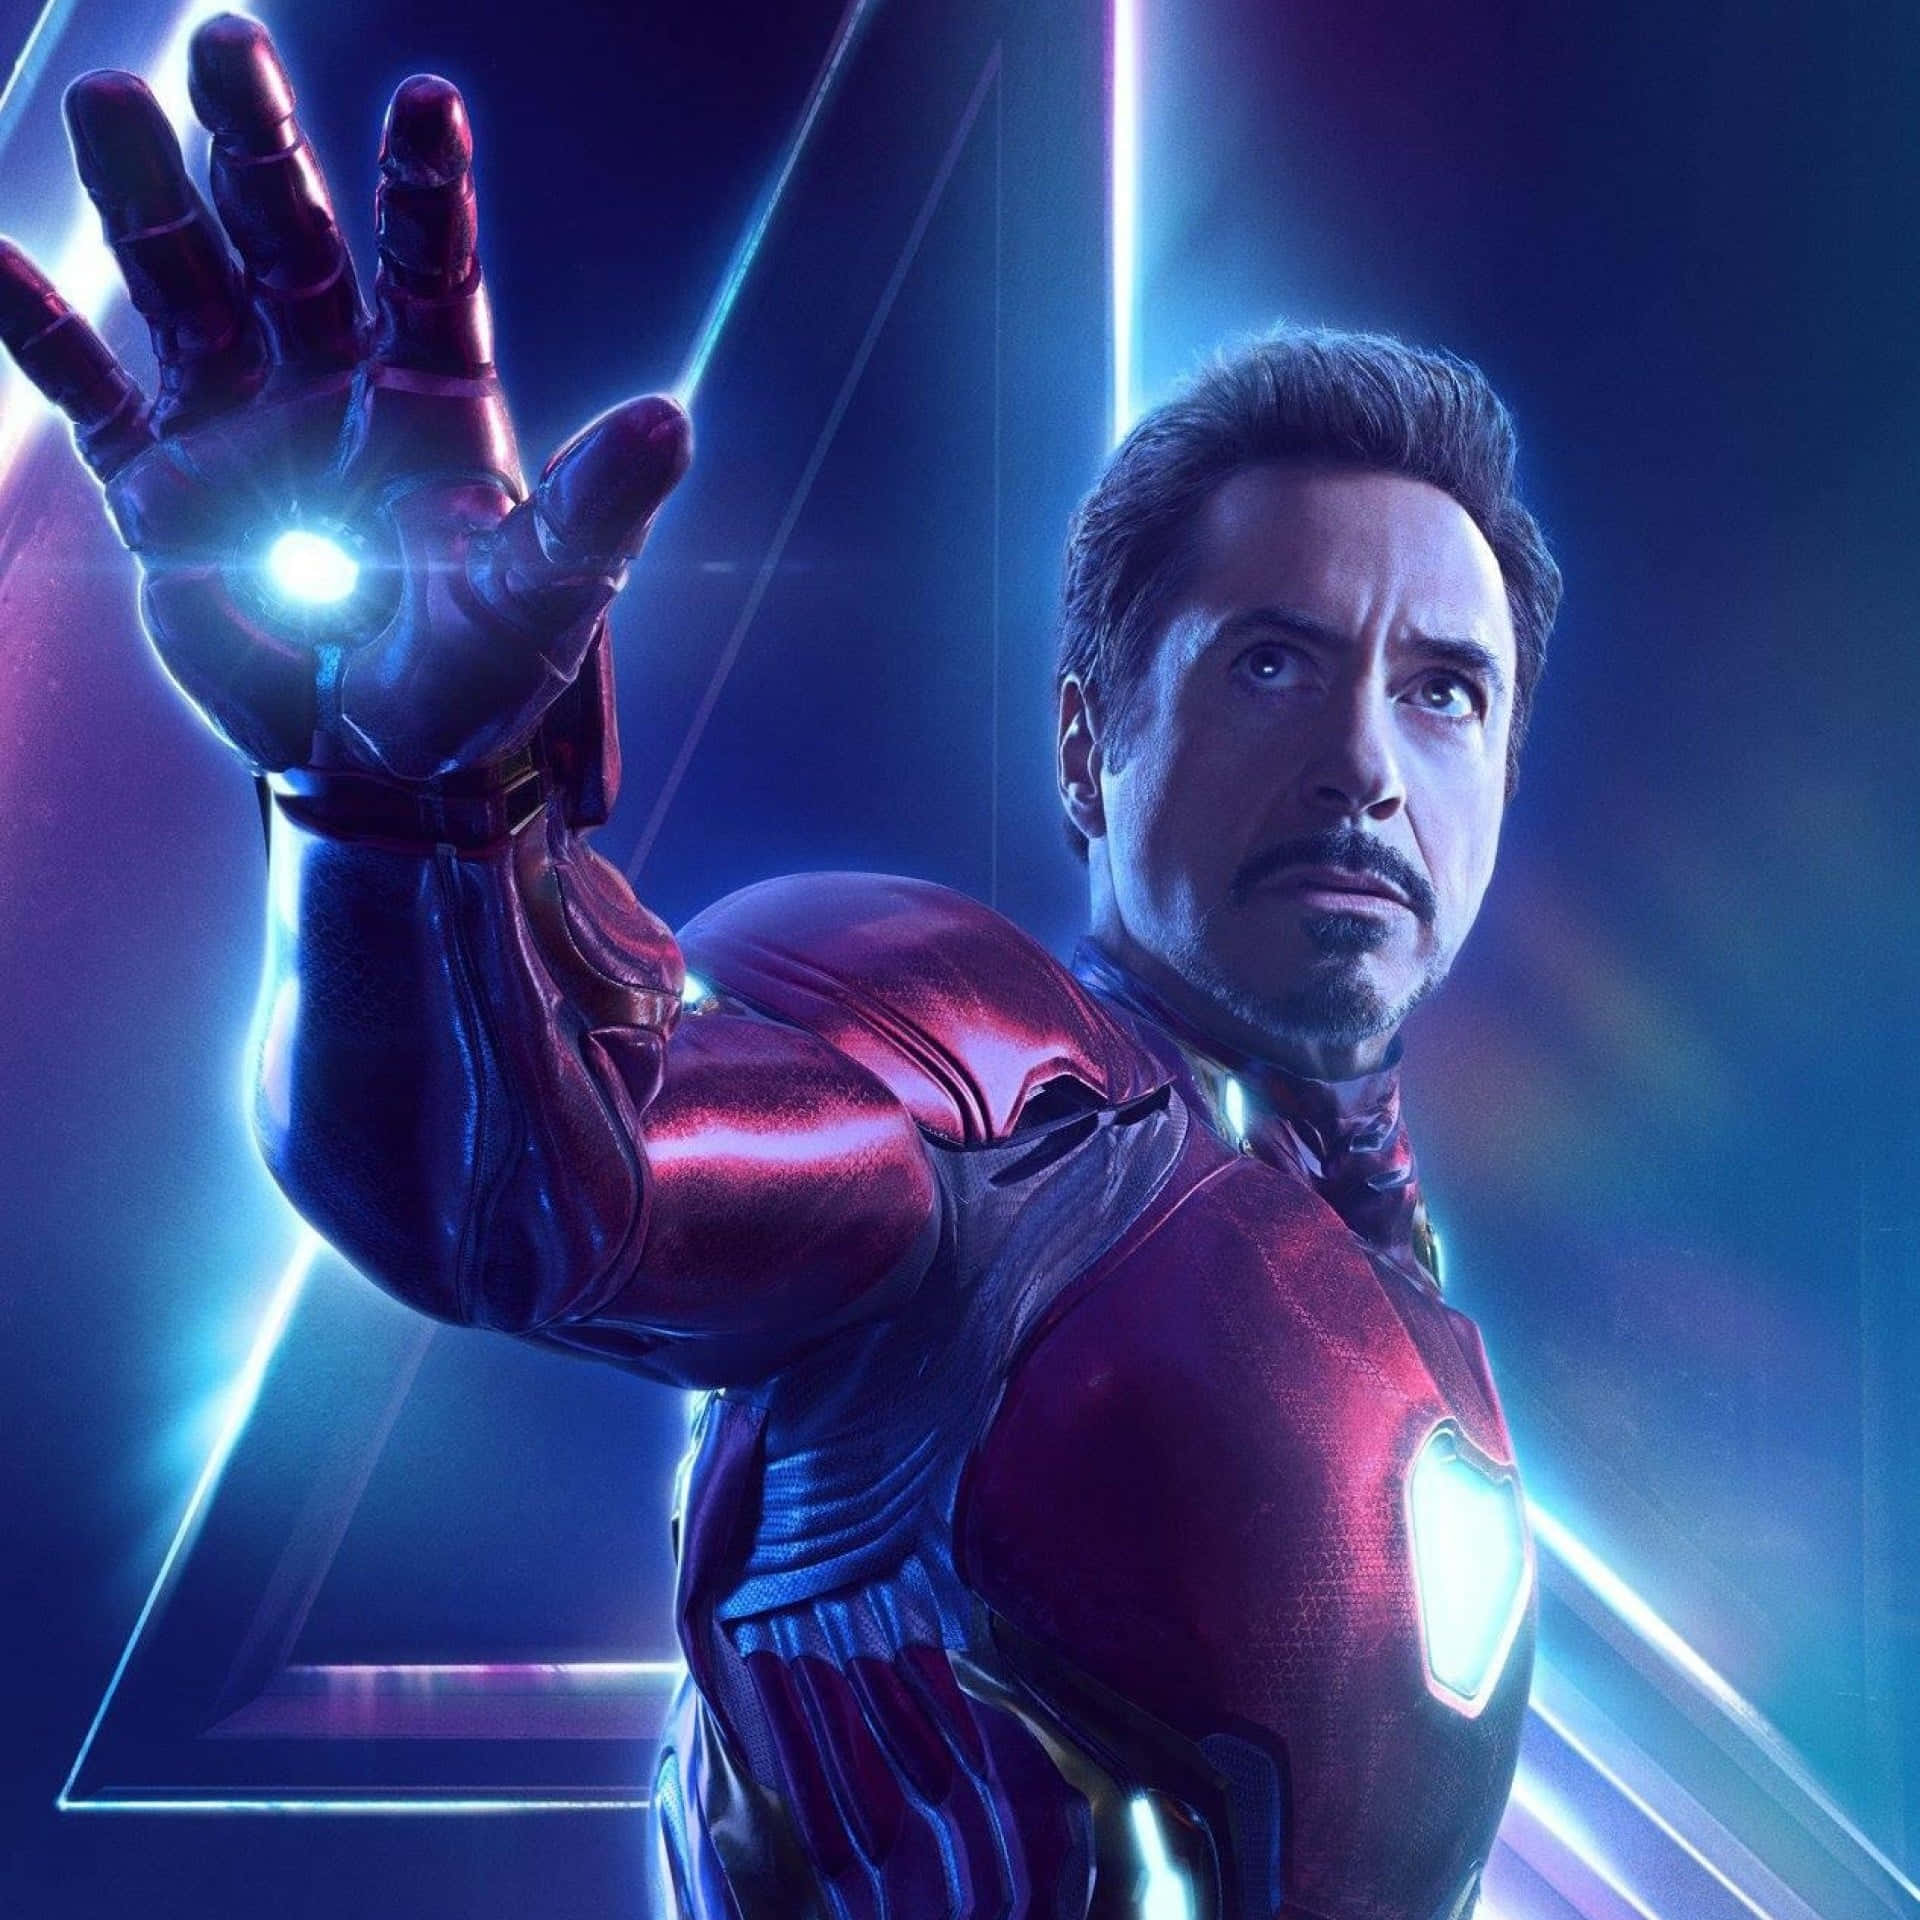 Immaginedel Poster Di Iron Man In Avengers Endgame